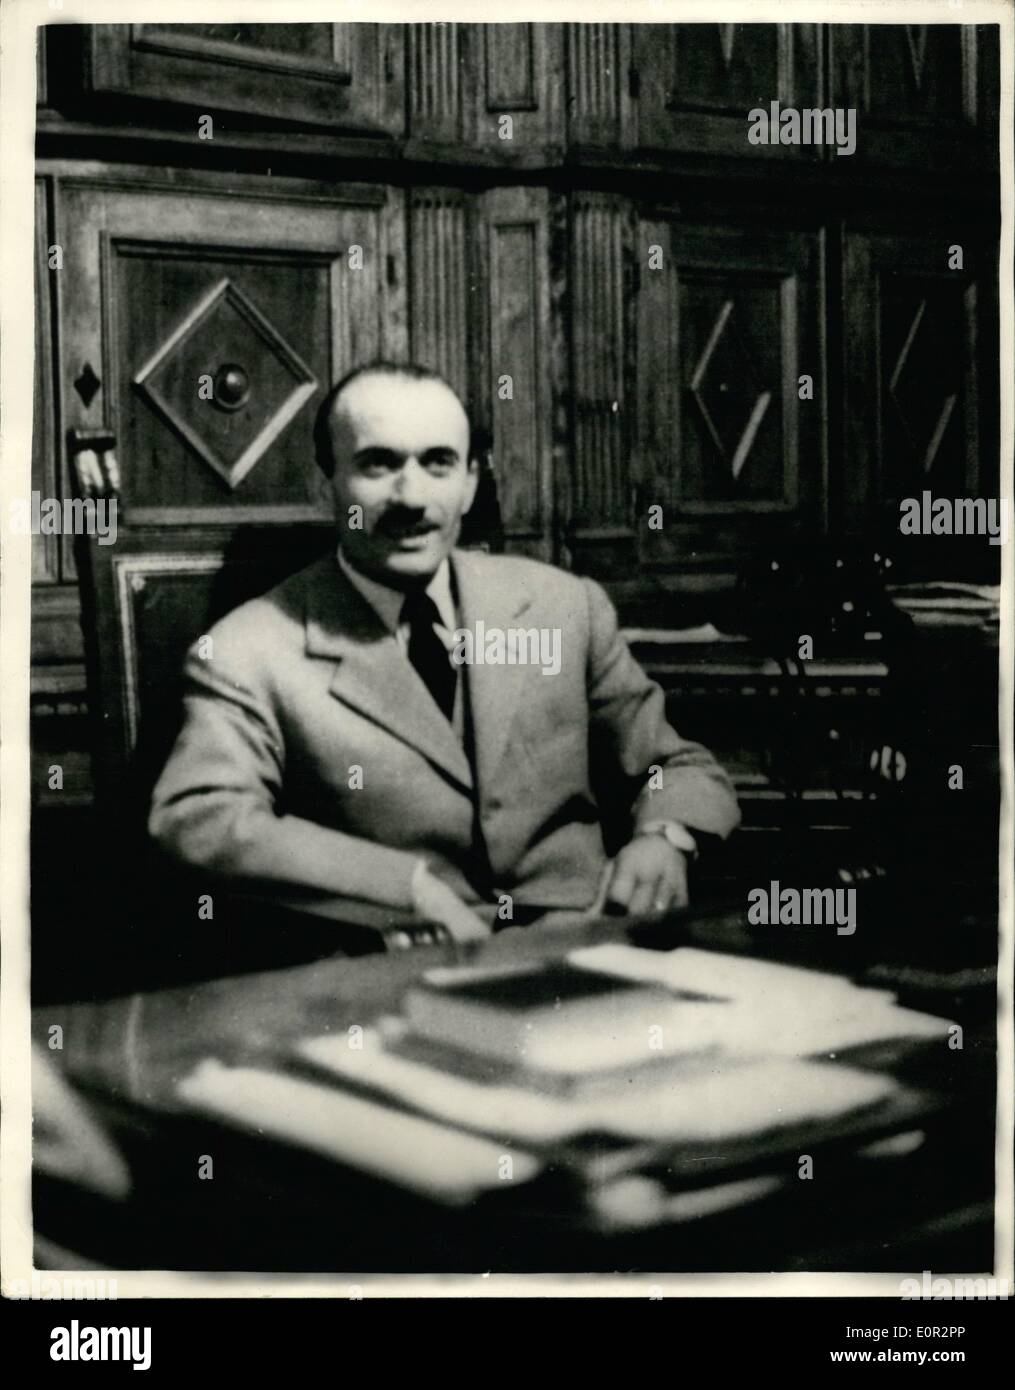 Oct. 10, 1957 - Communist And non- communists struggle for control of the state of San Marino. The struggle for control of the state of San Marino between the christian Democrat Provinsional govt.. controlled by Giovanni Savoritto and signor Melloni leader of the Communist Government. Yesterday the two-opposing leaders had a 30 minute meeting.. The Communists have formed patrols - ''Volunteer red'' - all armed to check arrivals and departures at the tiny state Stock Photo